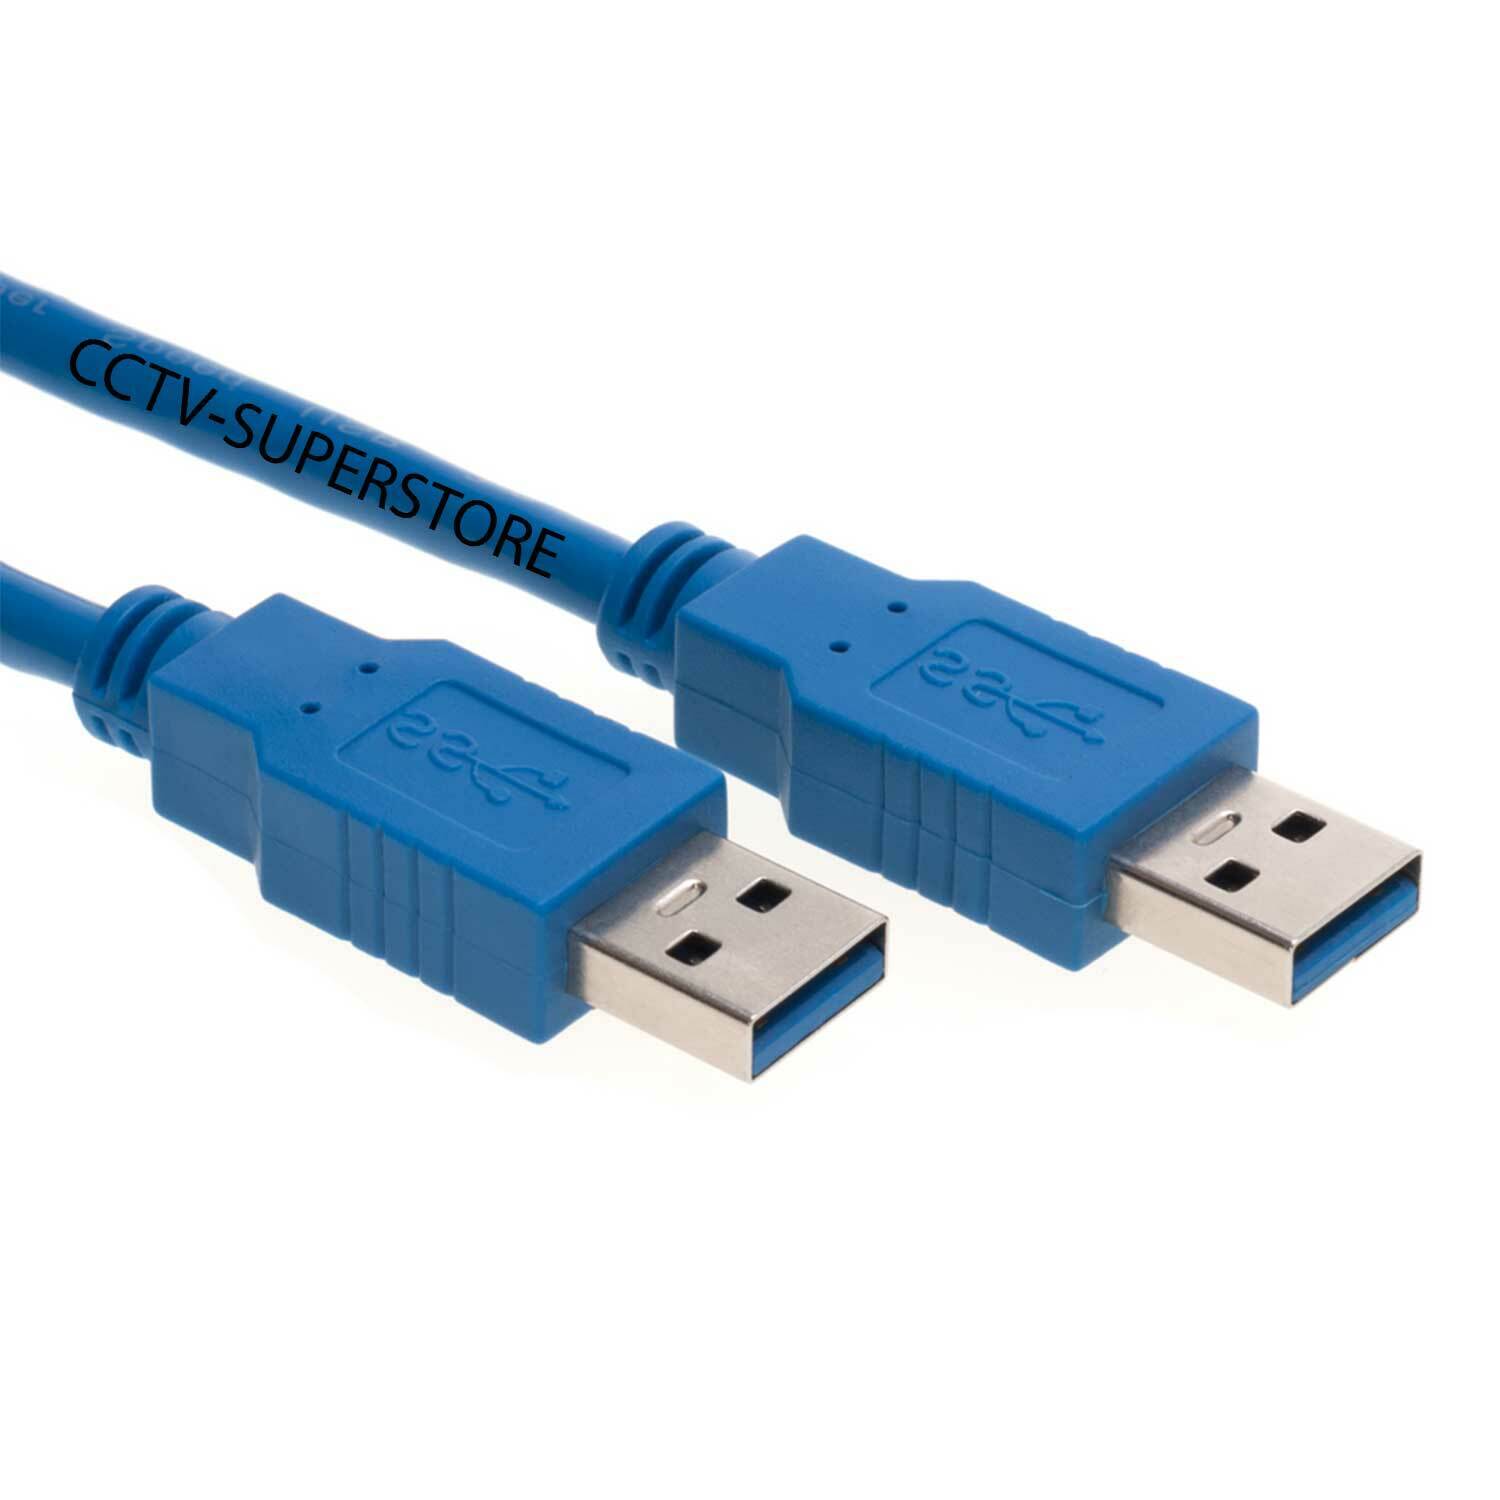 USB 3.0 Type A Male to A Male Blue Cable Data Transfer Hard Drive Laptop TV